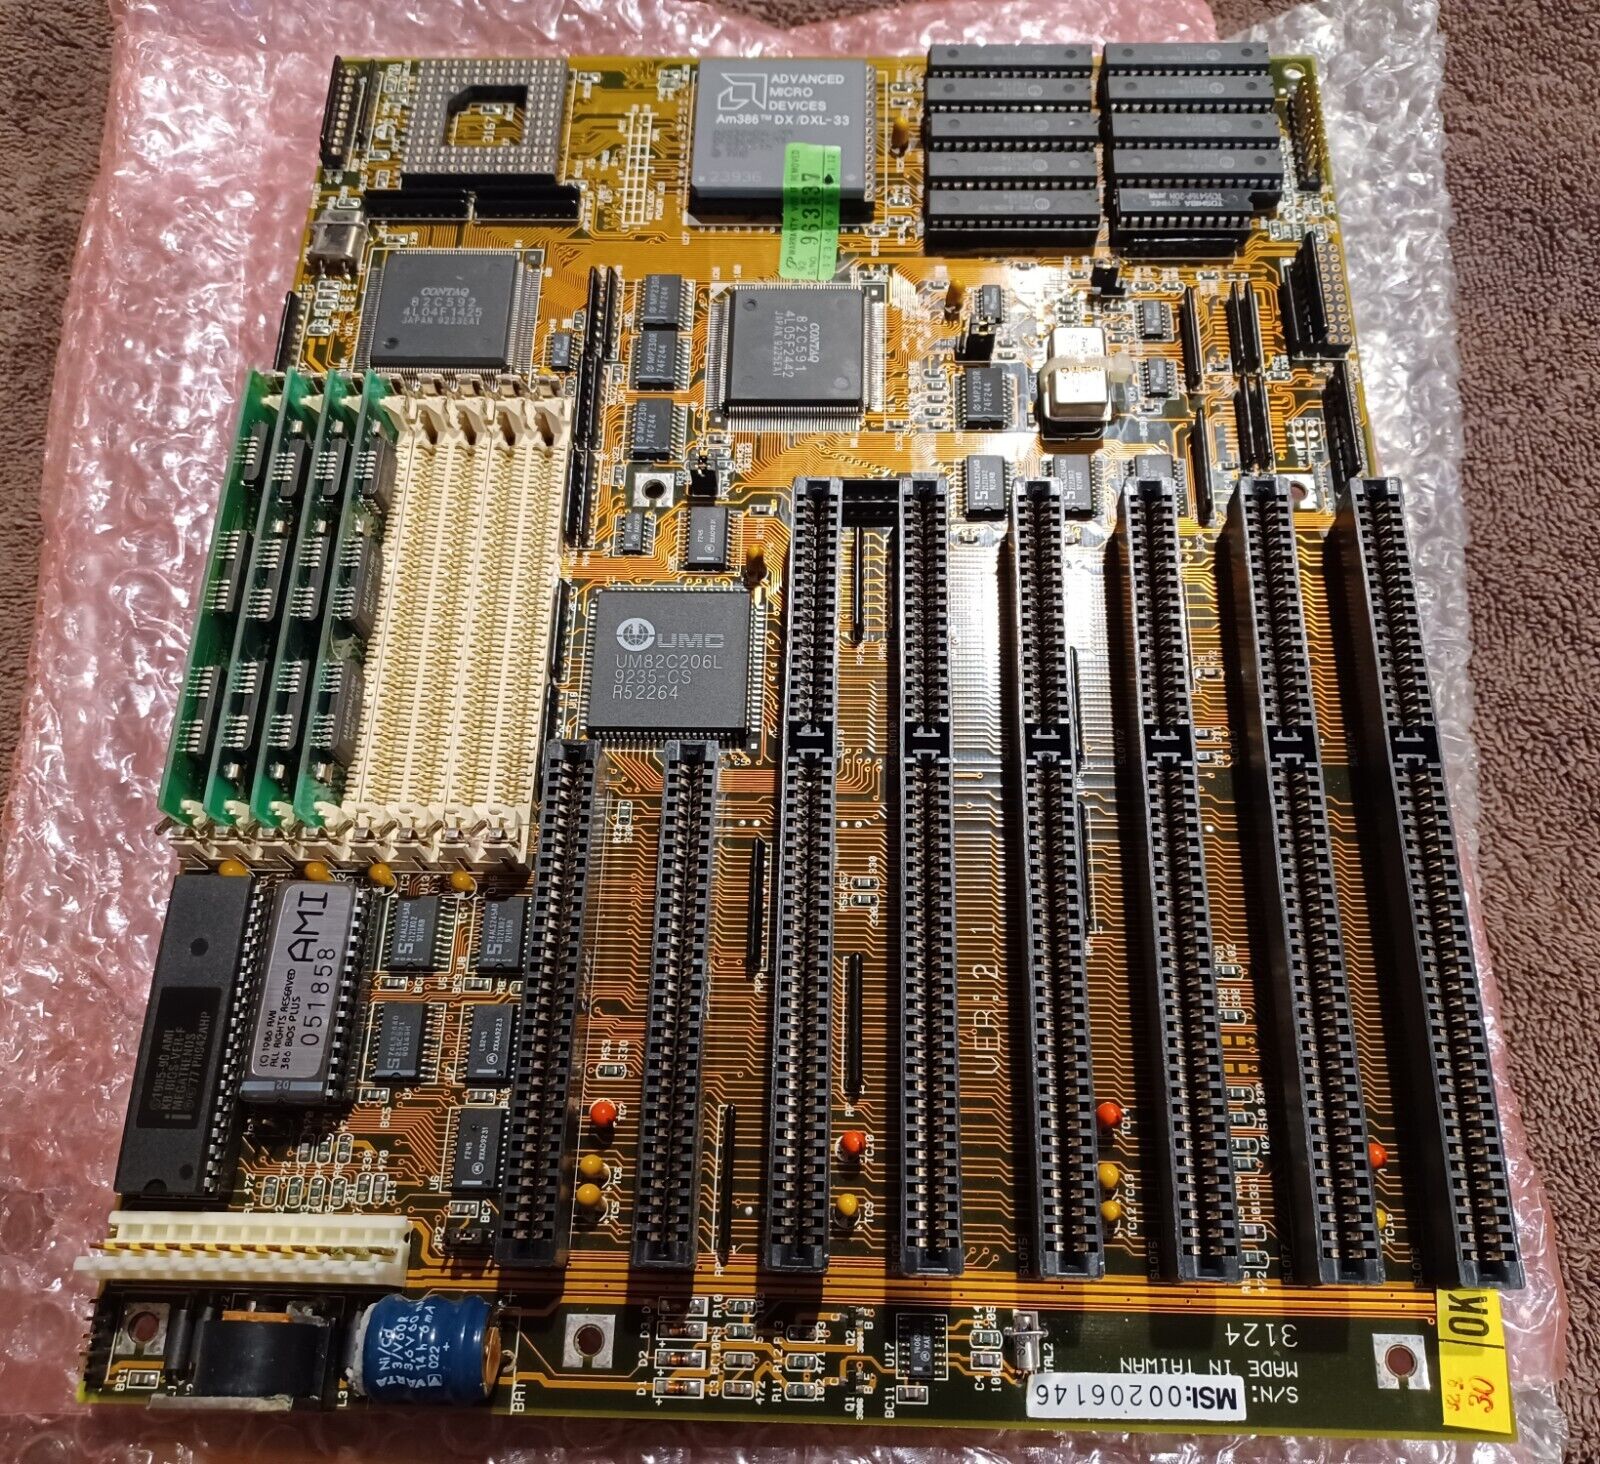 386 motherboard with AMF 386DX-33 CPU + 4MB Ram, Vintage, New Old Stock